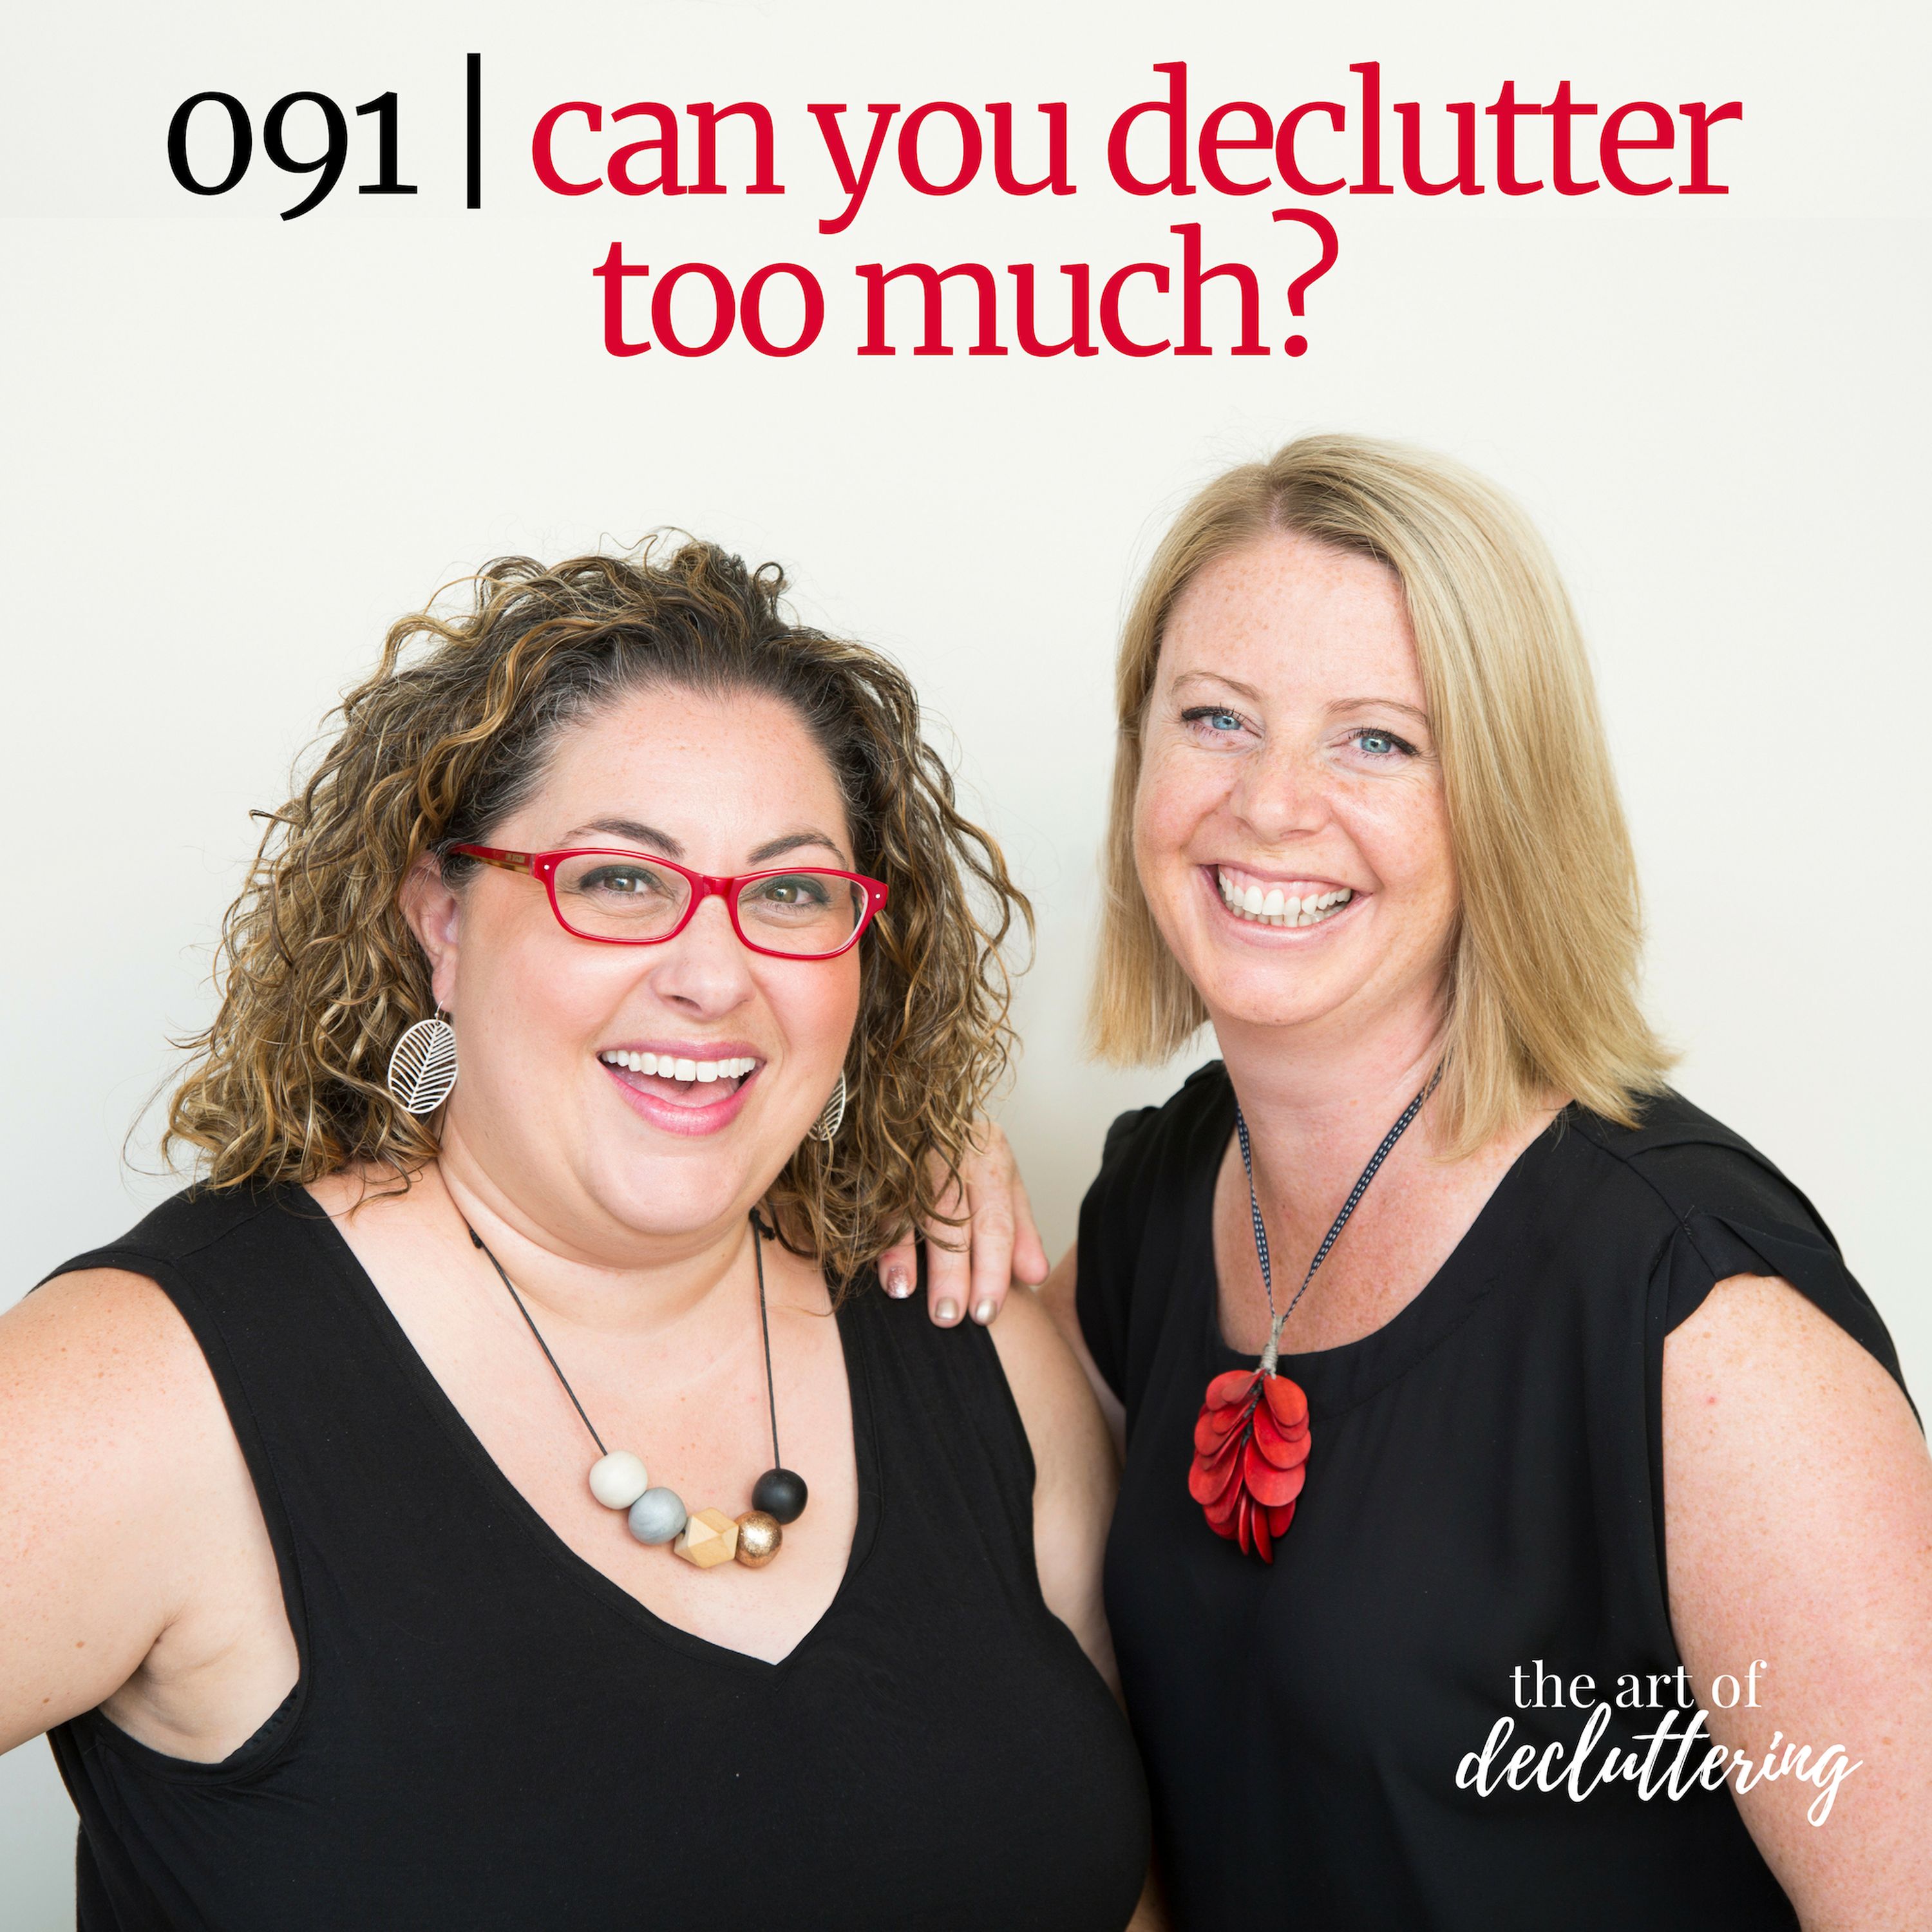 Can you declutter too much?